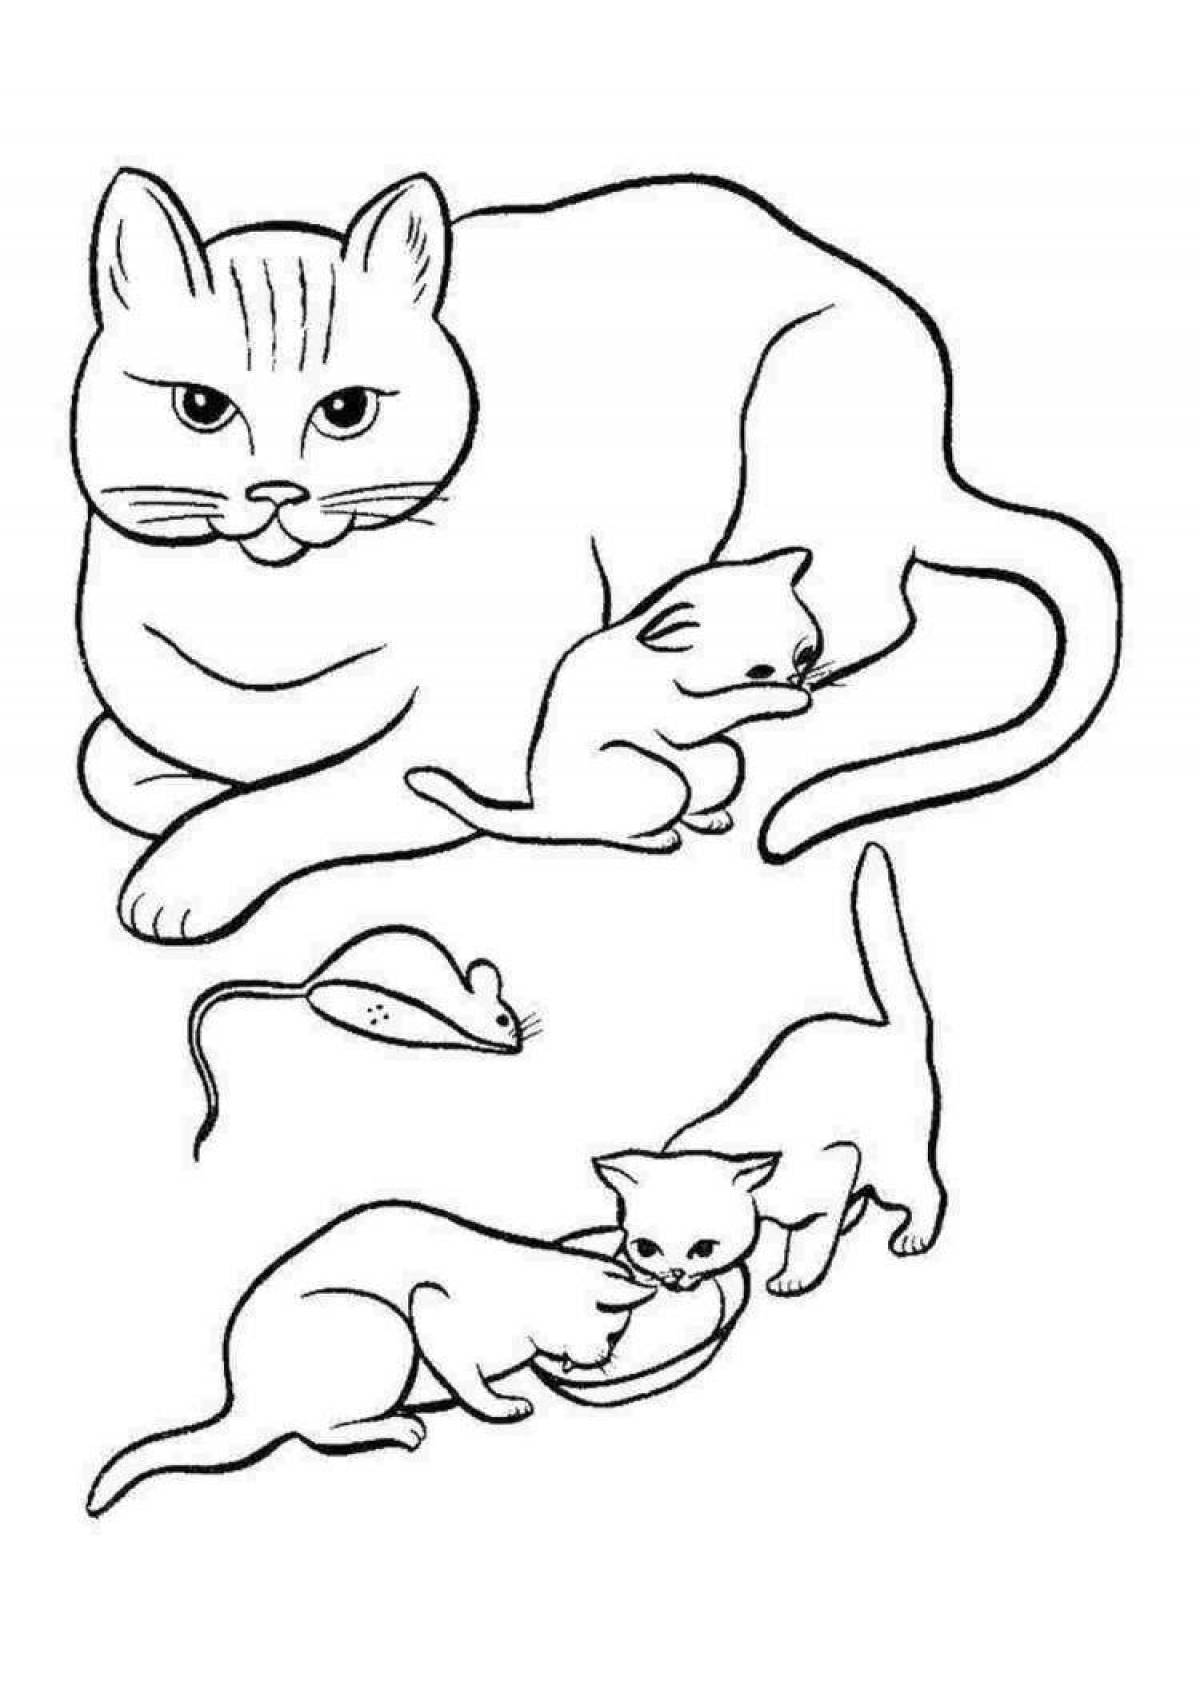 Snuggable coloring page kitten fat